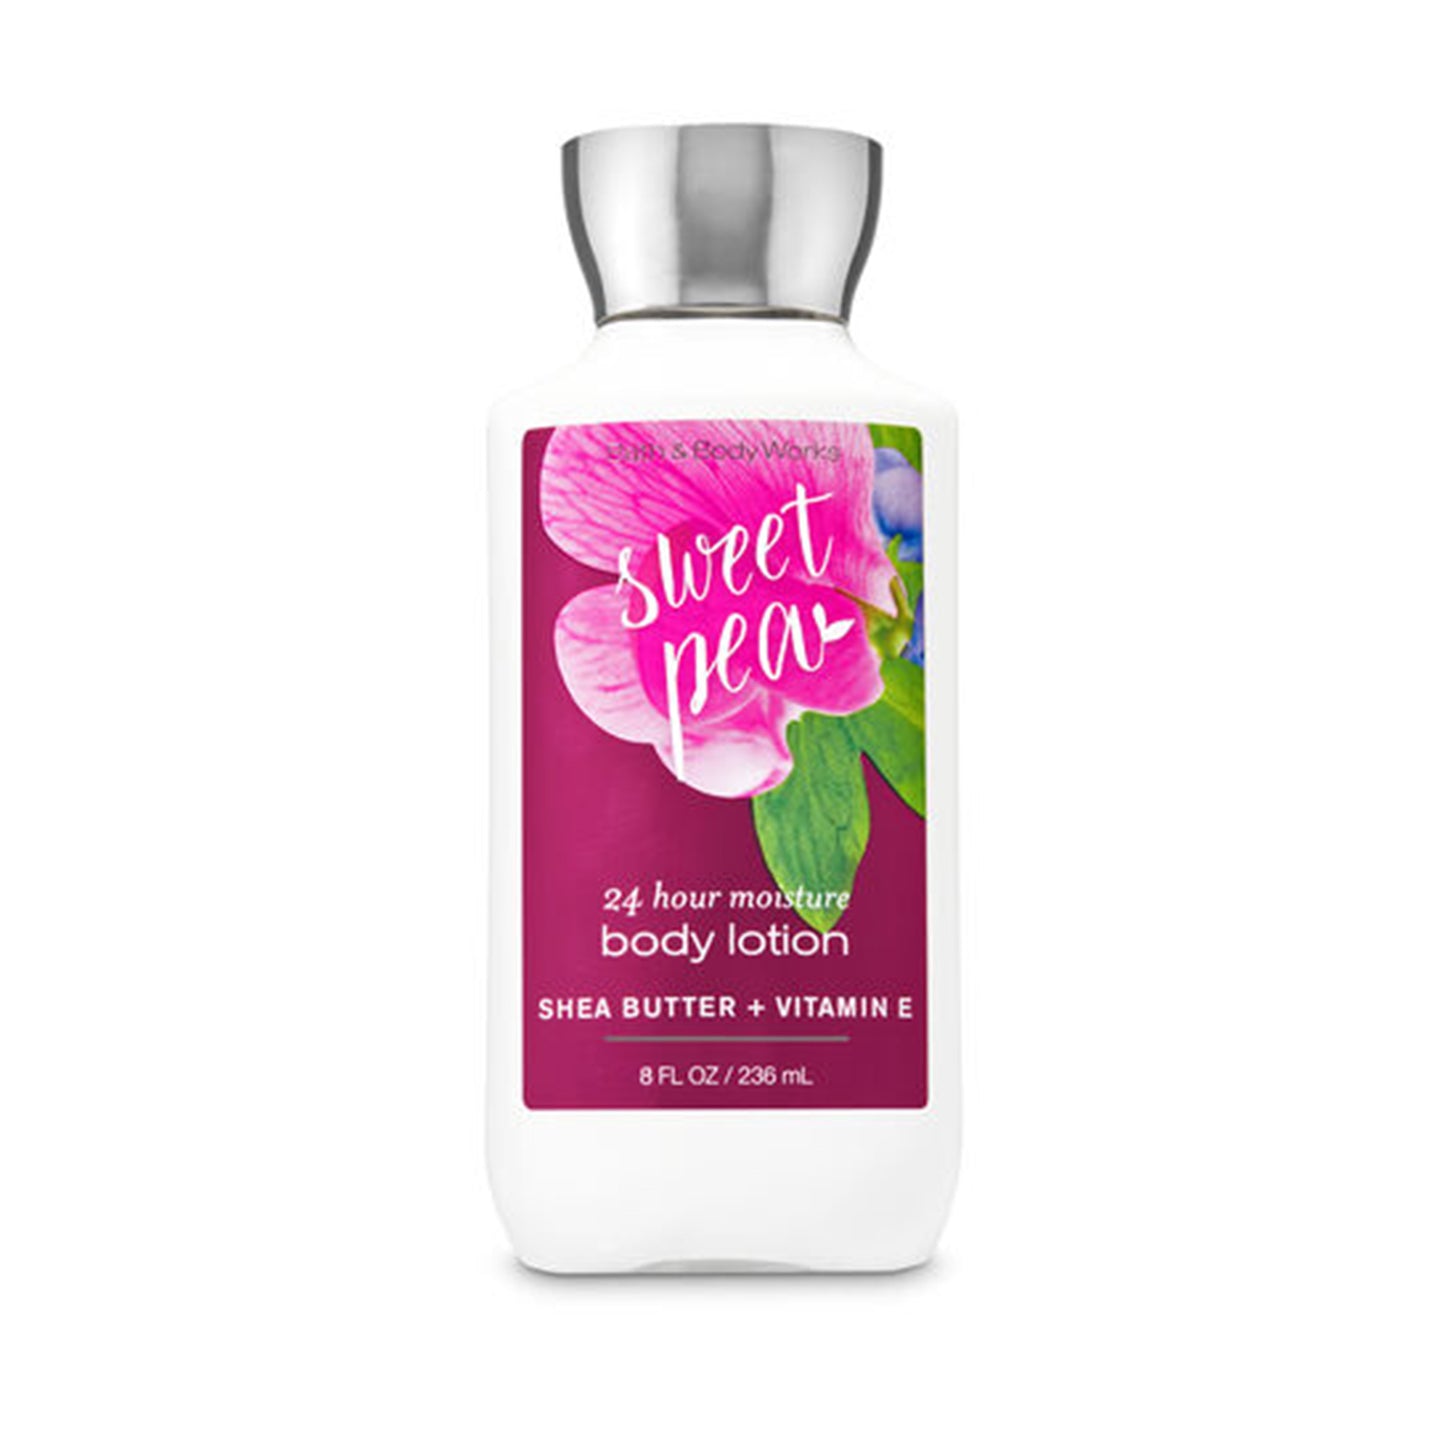 Bath & Body Works both lotion sweet pea. Cash on delivery in Karachi Lahore islamabad quetta Pakistan